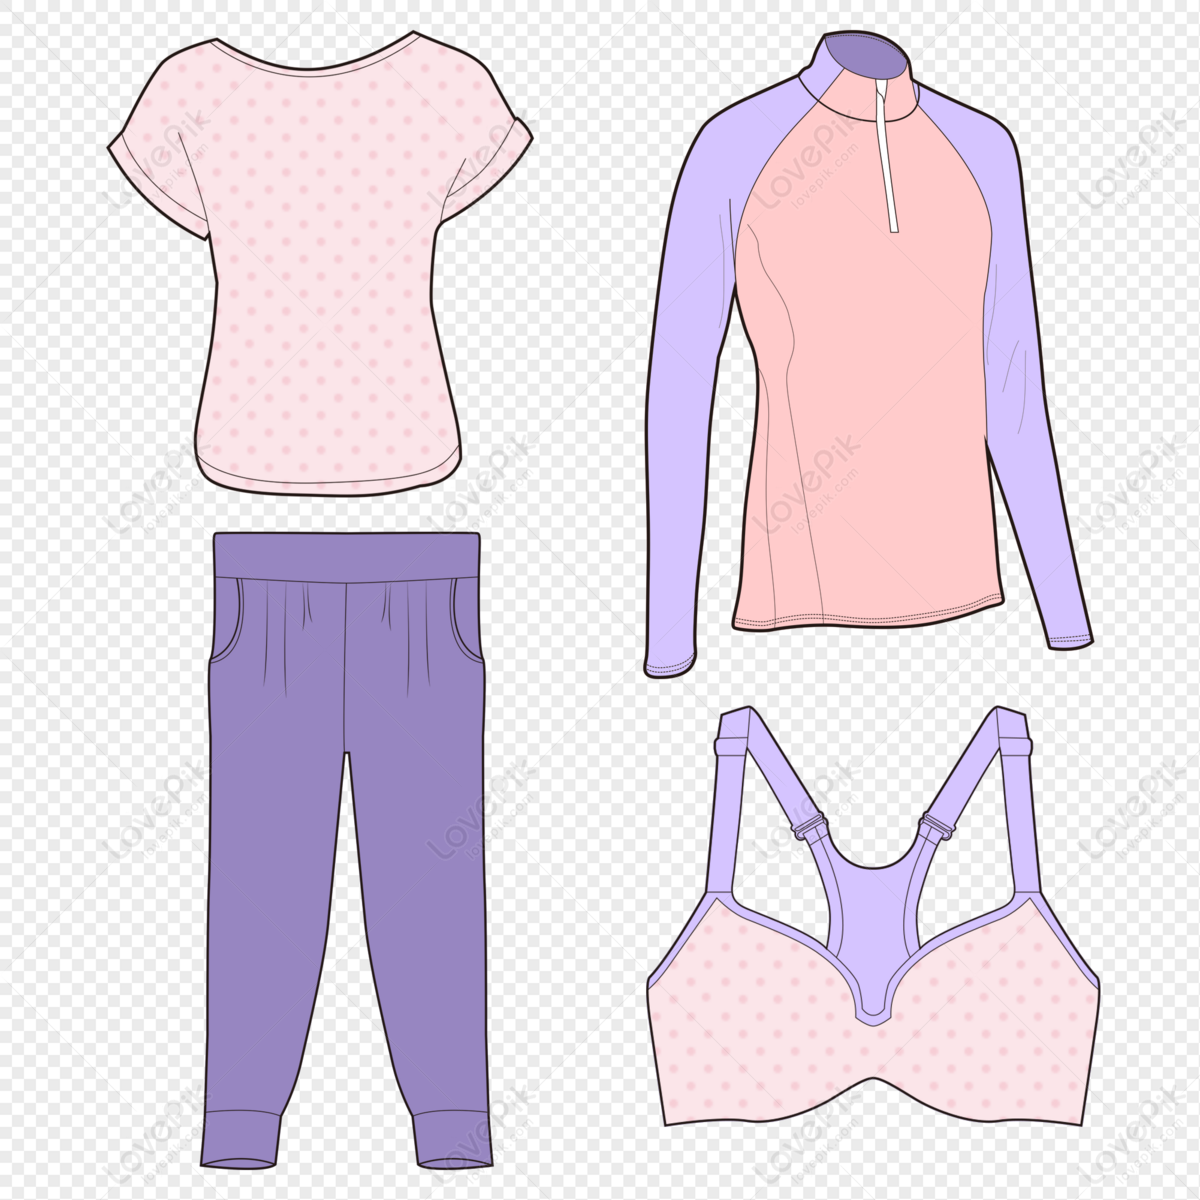 Sportswear Design PNG Image And Clipart Image For Free Download - Lovepik |  401146468